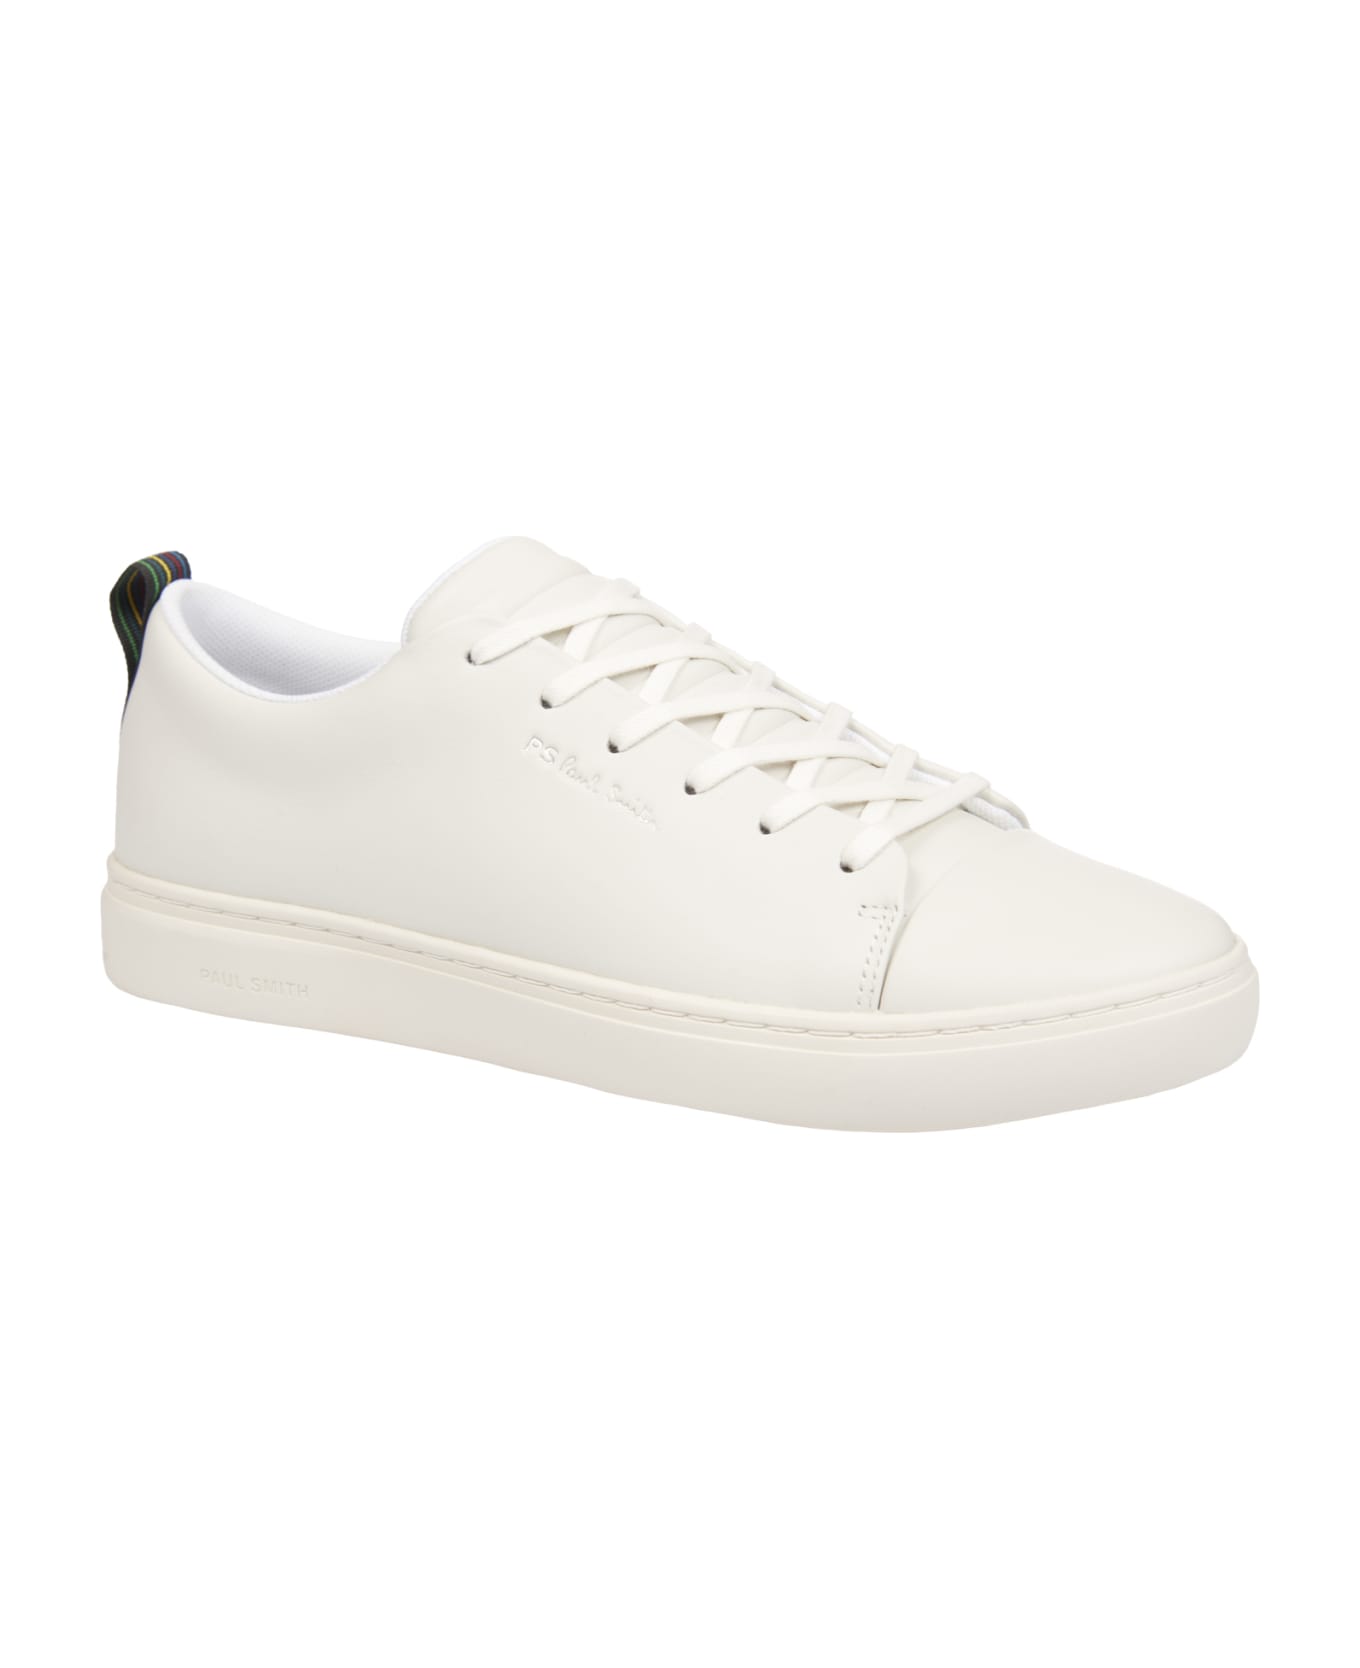 Paul Smith Lee Sneakers - White